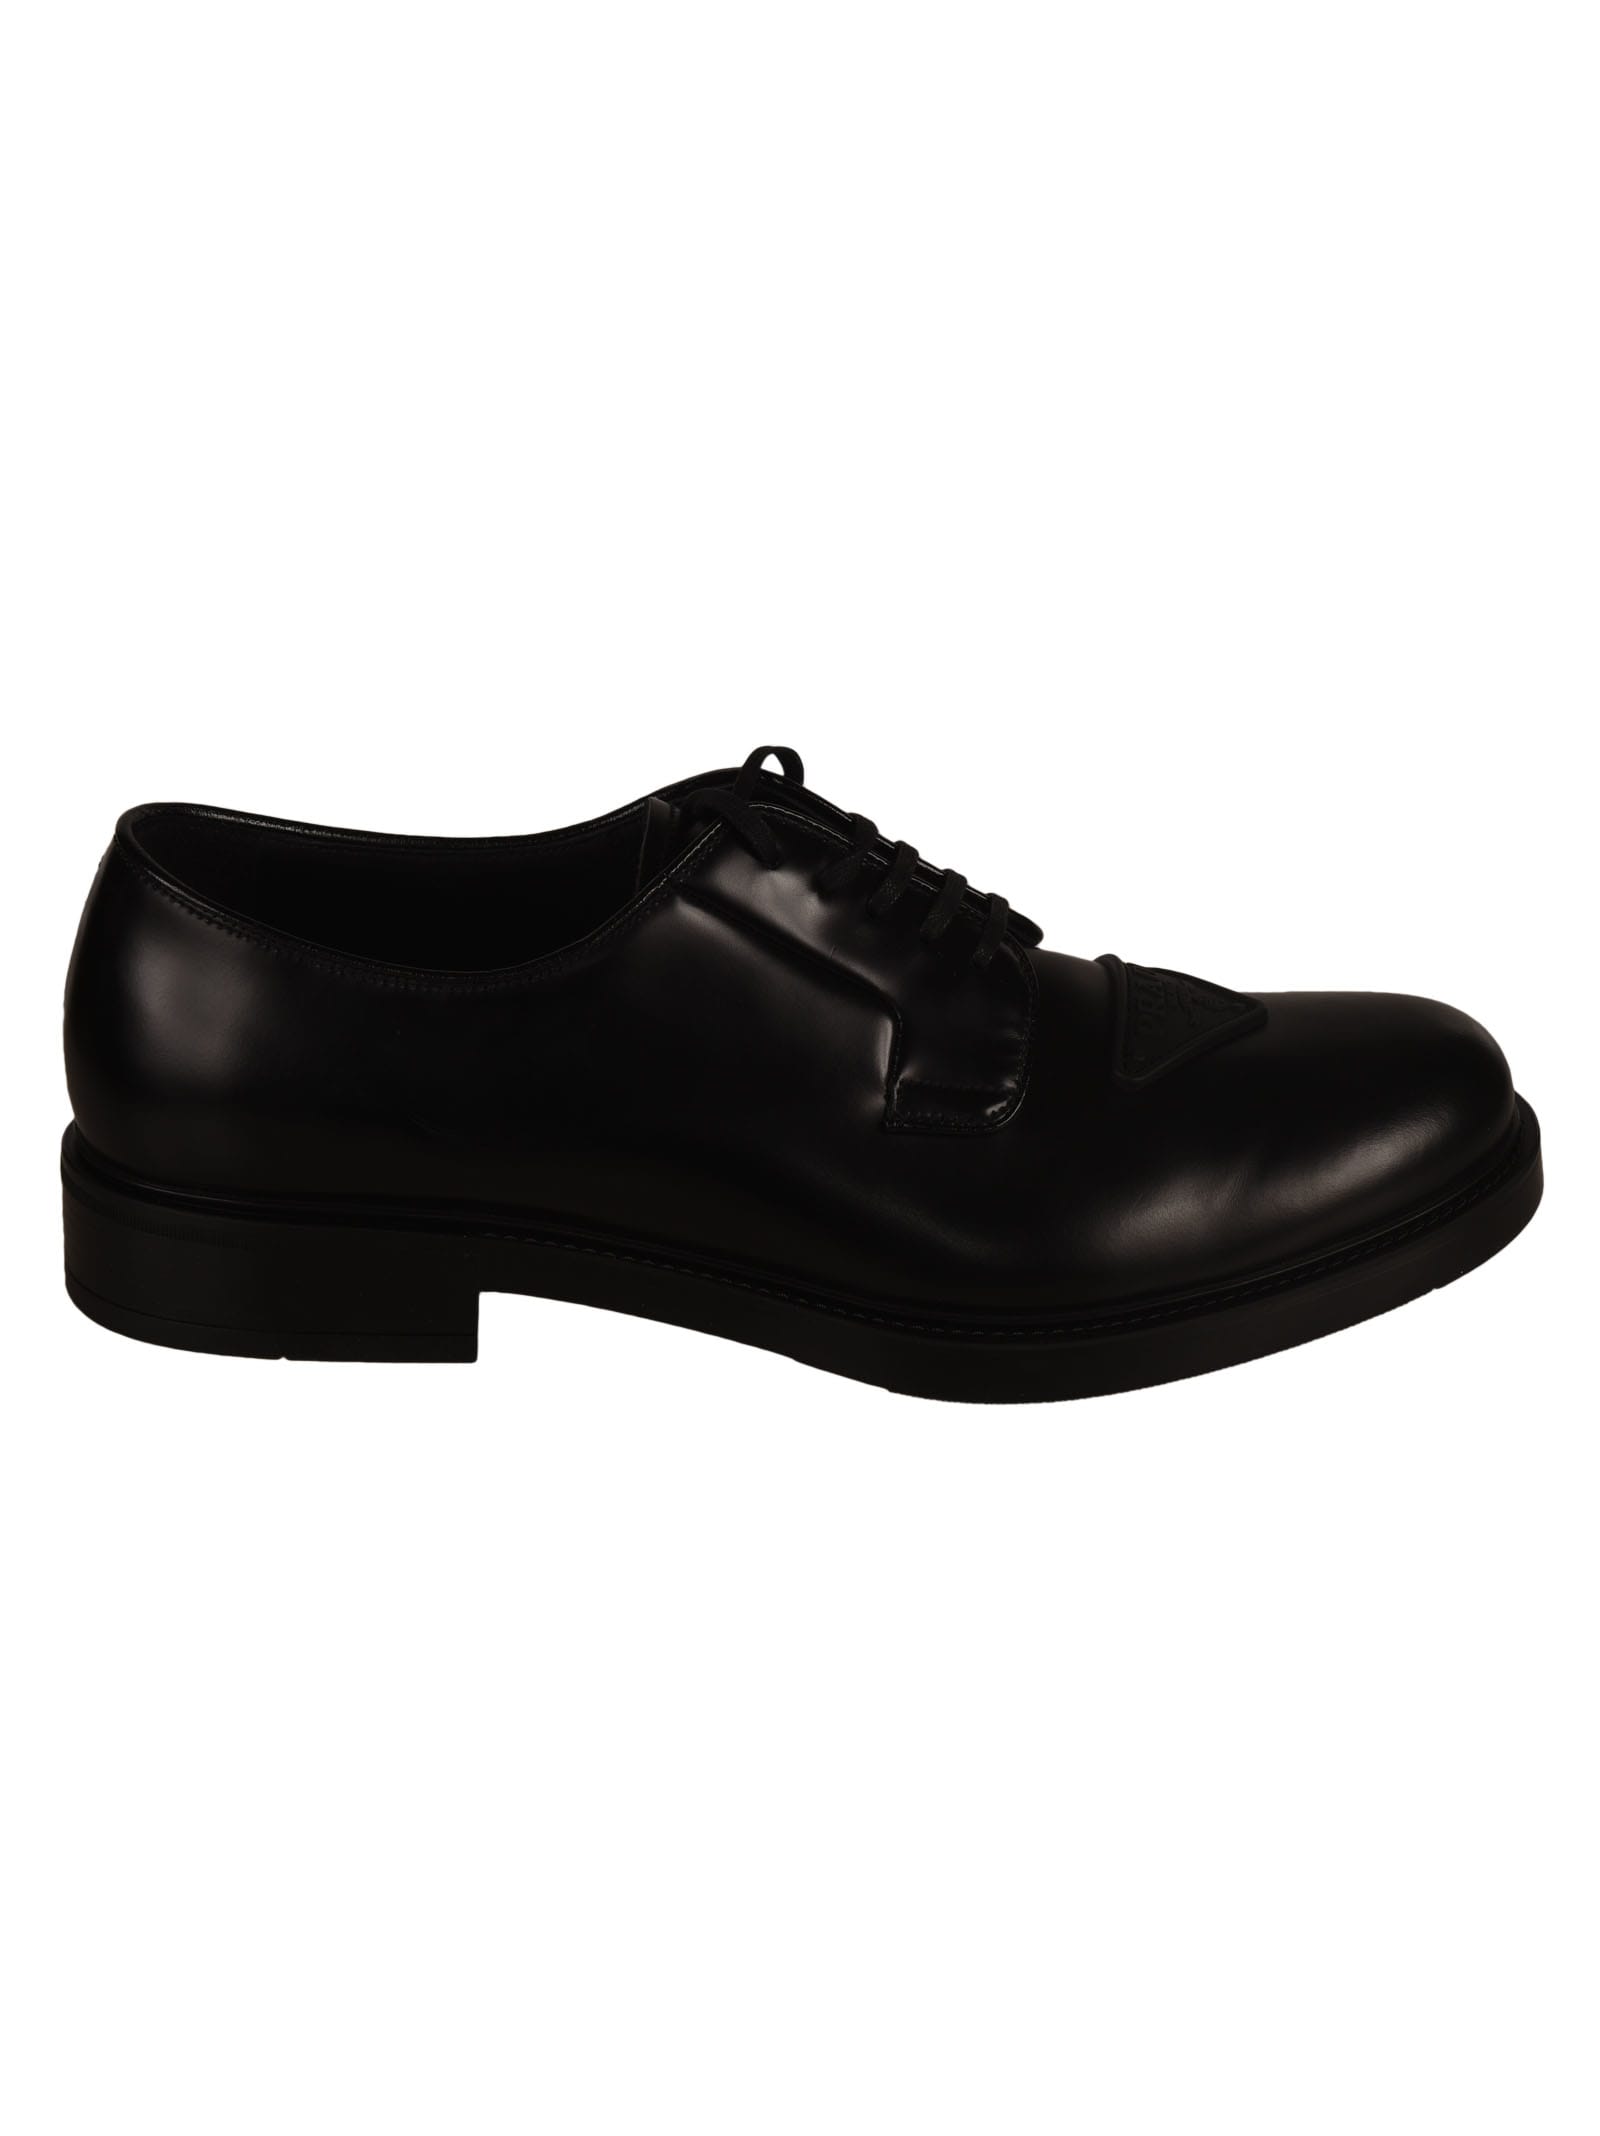 Prada Logo Patched Derby Shoes